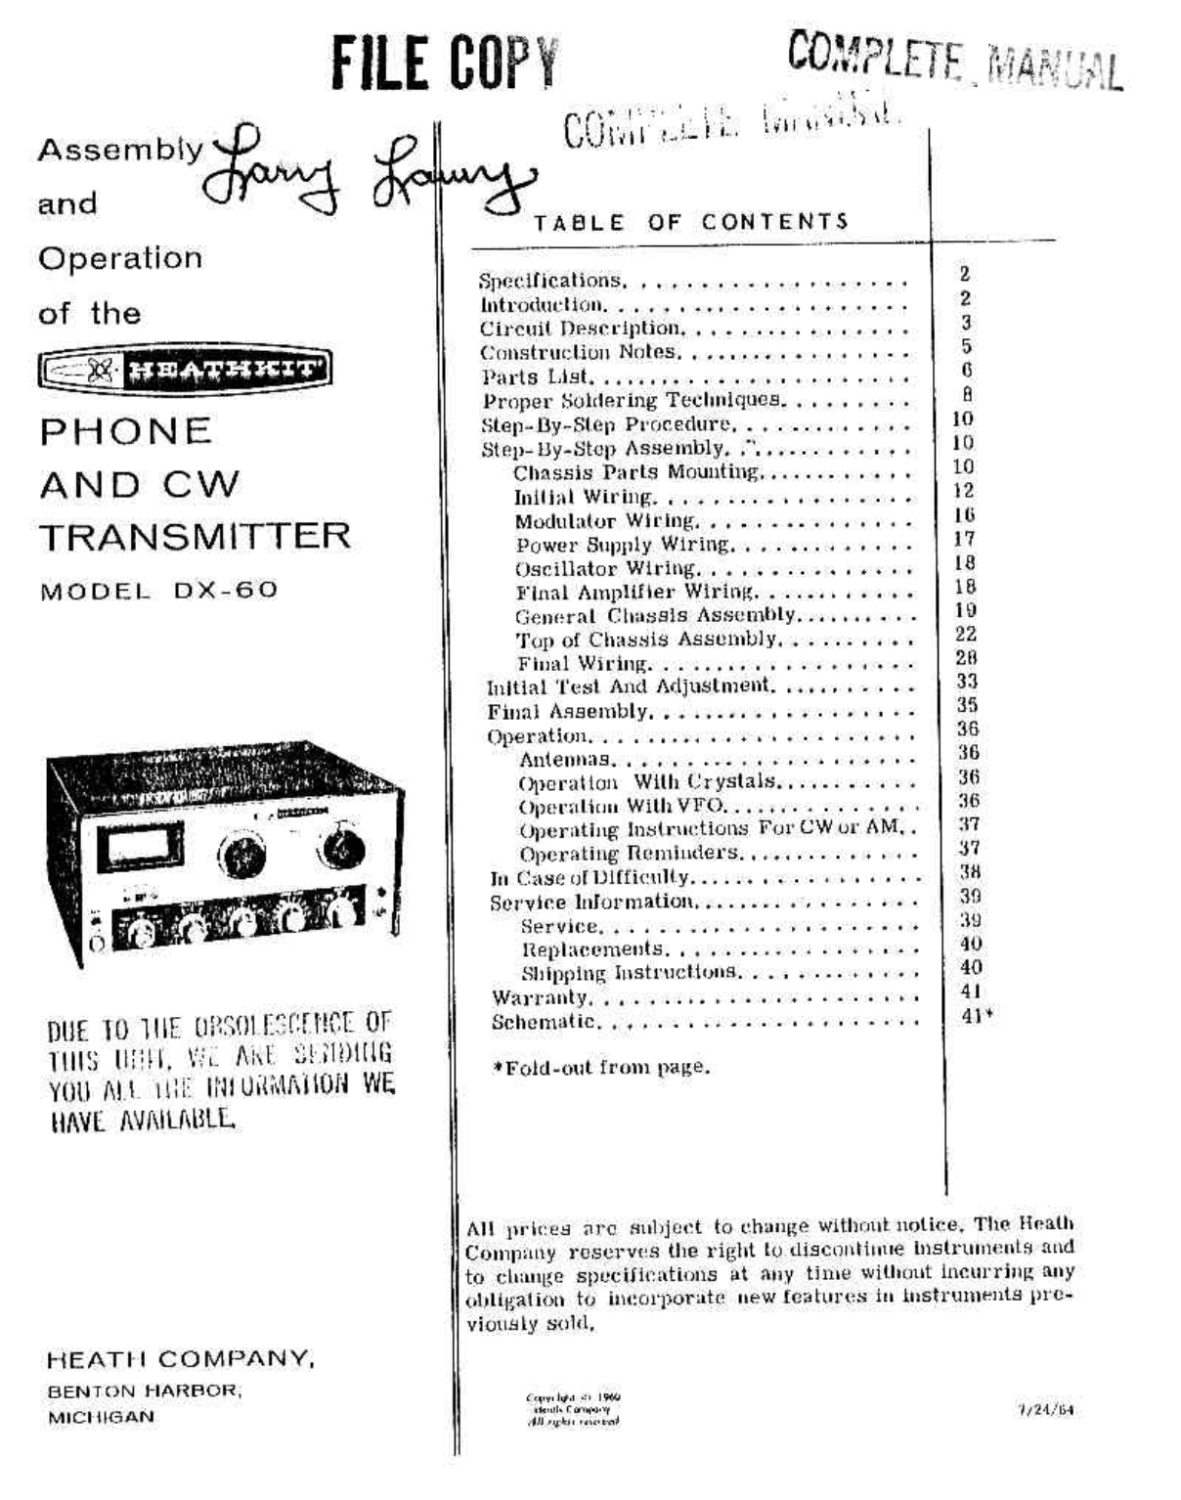 Heathkit DX-60 Phone and CW Transmitter - Assembly Manual 1